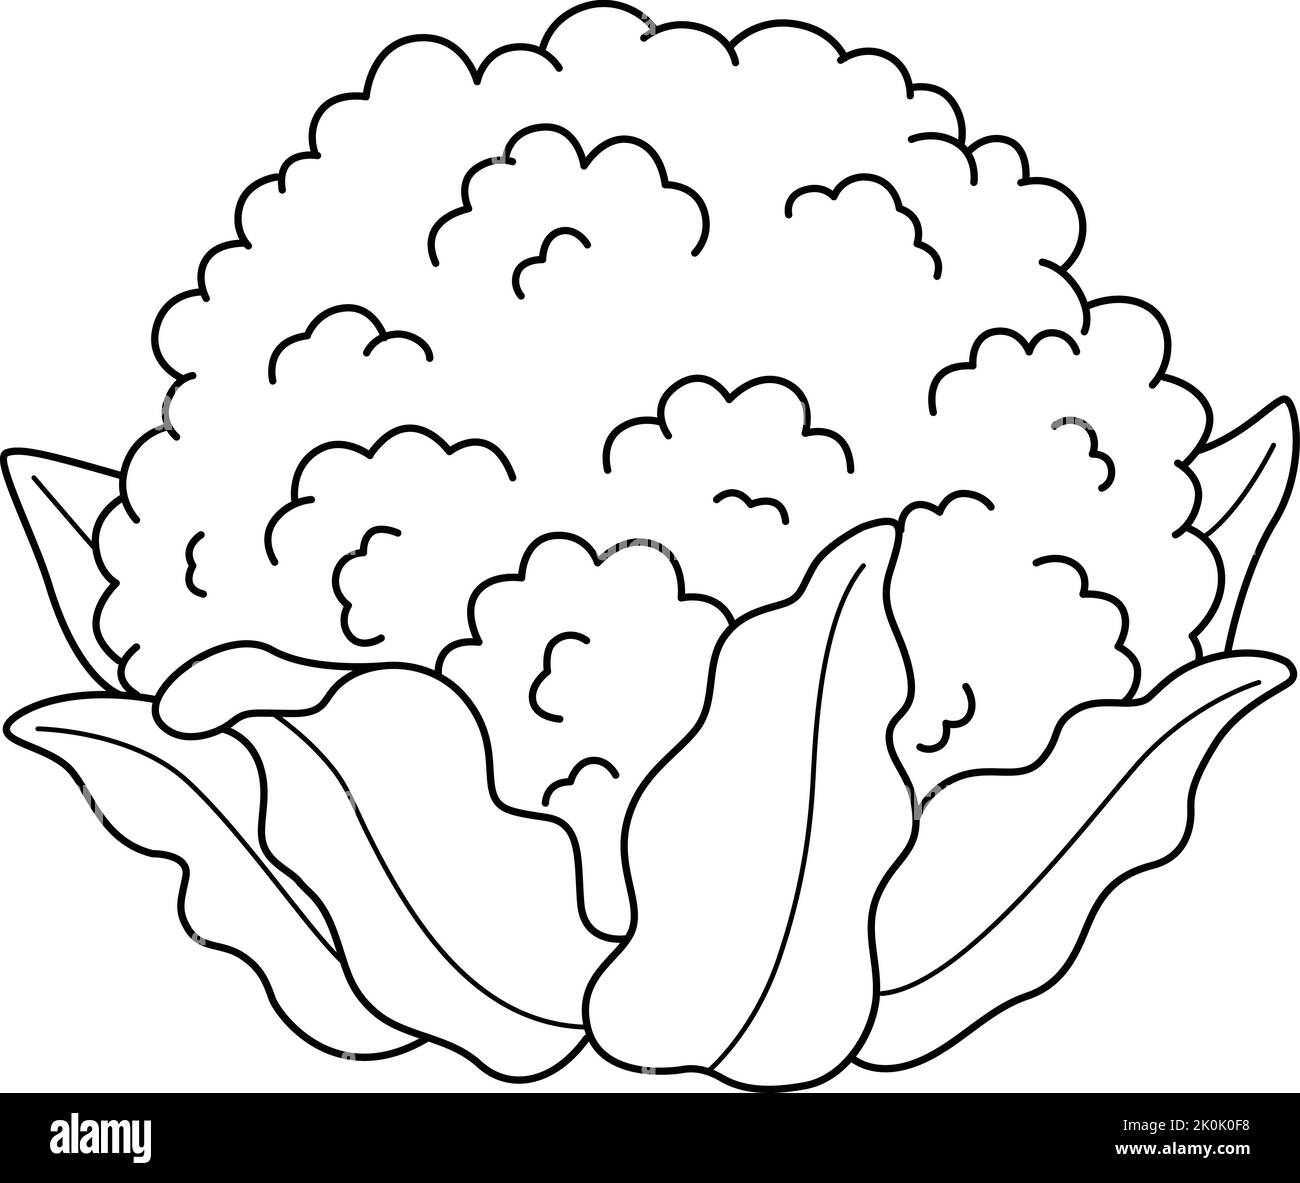 Cauliflower Vegetable Isolated Coloring Page  Stock Vector